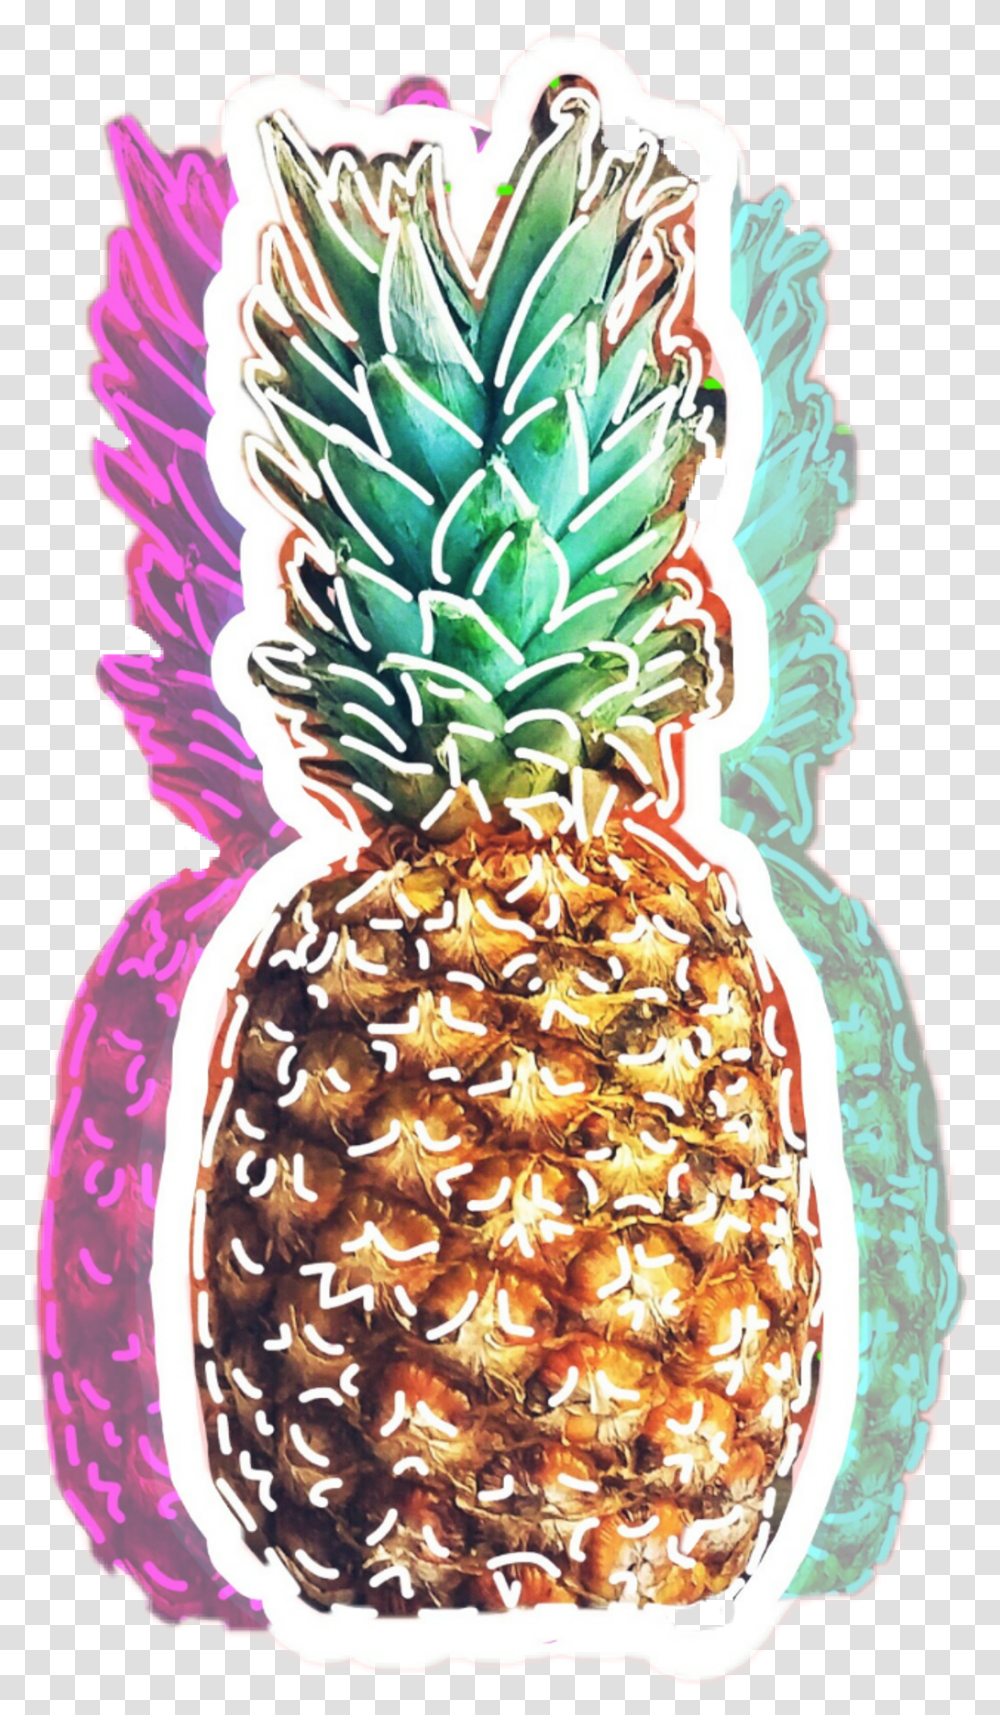 Download Pineapple Sticker Pineapple Full Size Image Pineapple Stickers, Fruit, Plant, Food Transparent Png